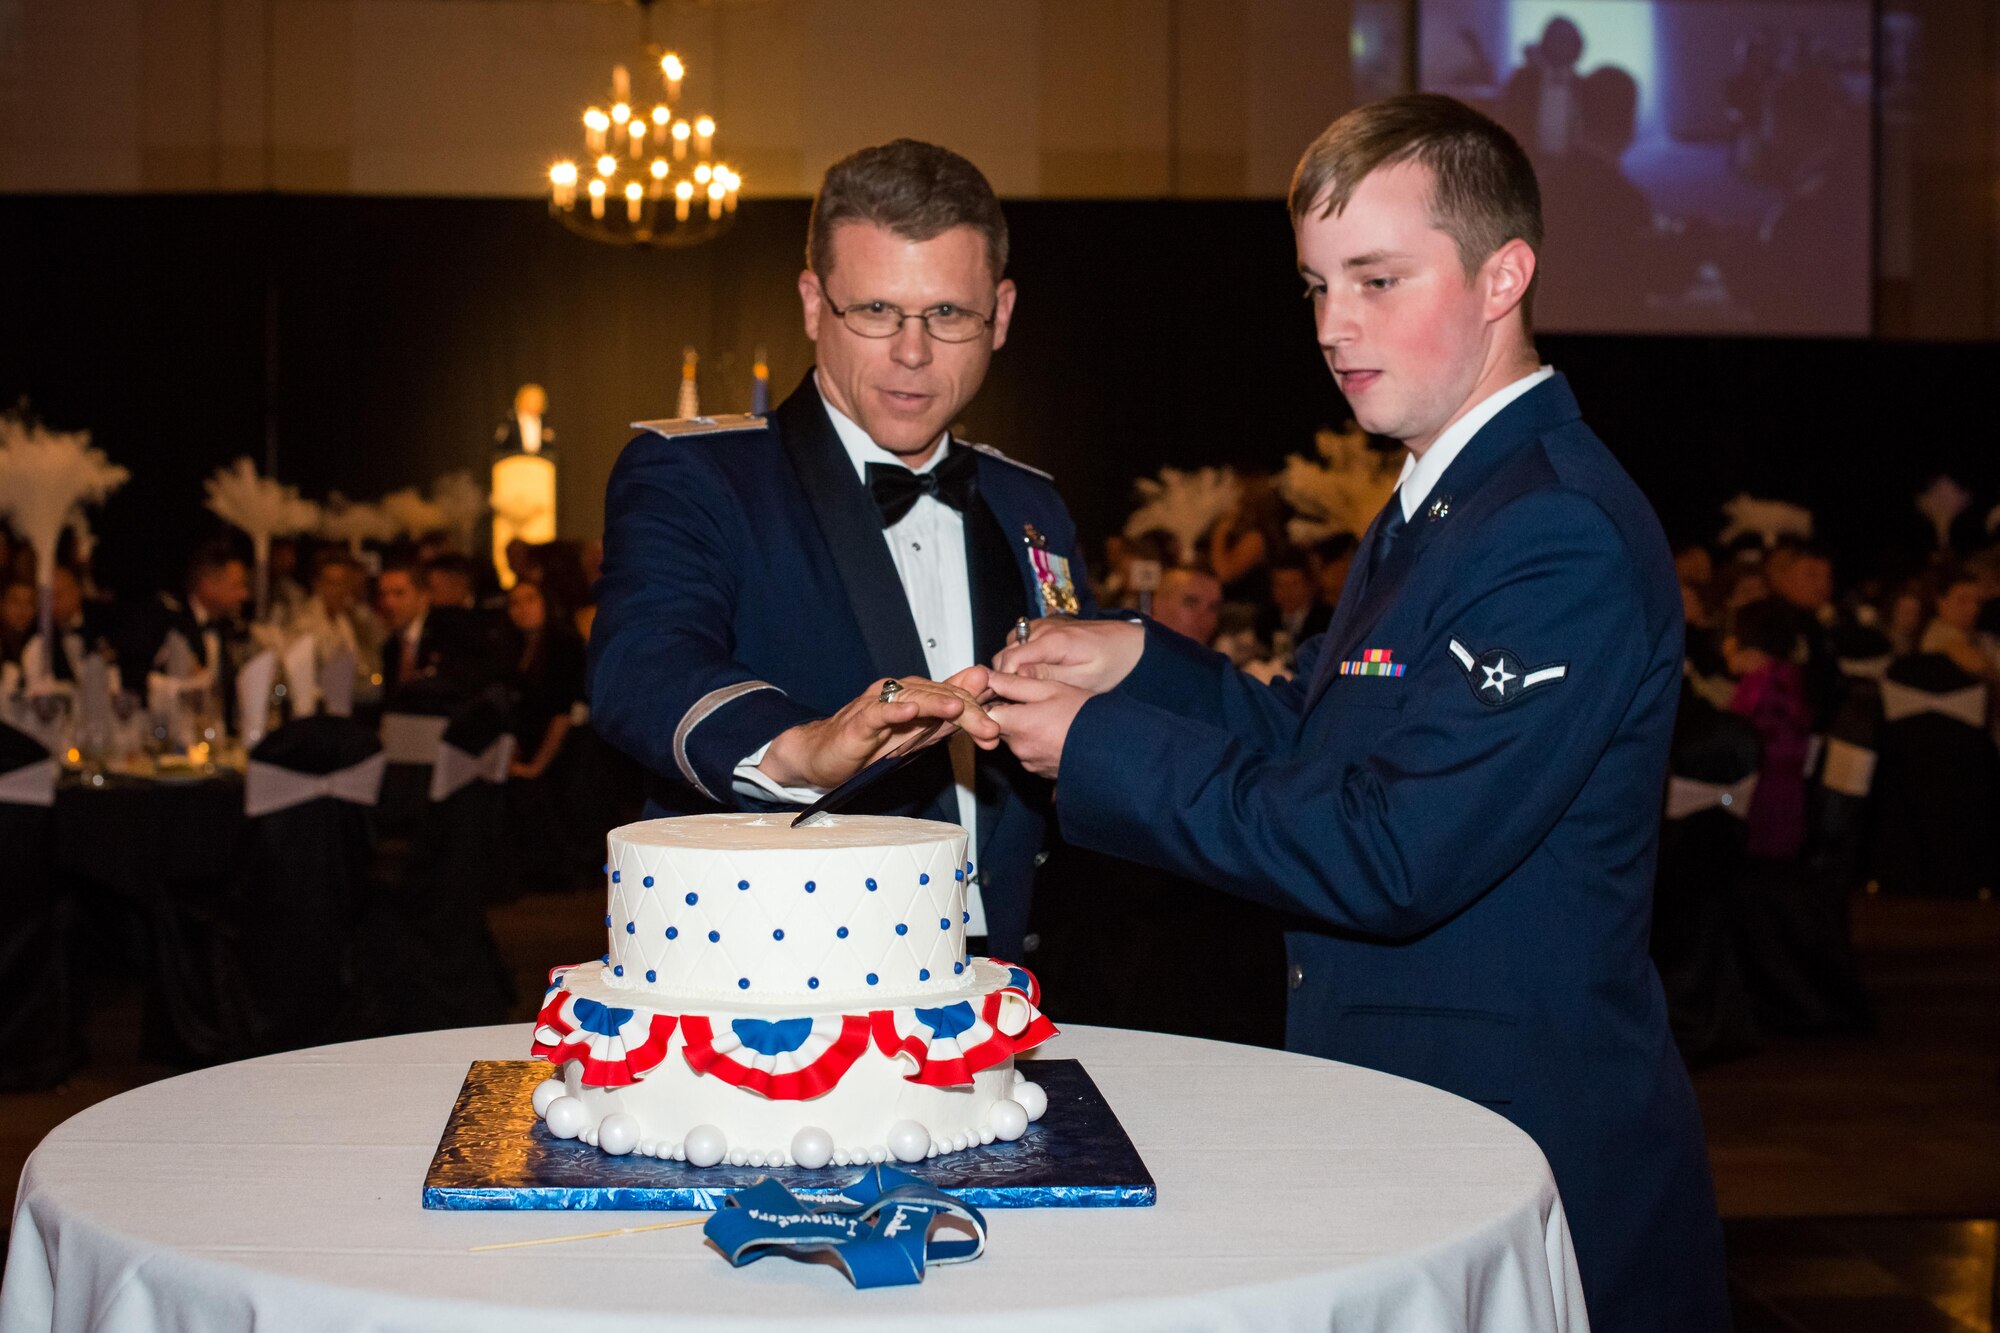 Brig. Gen. Steven J. Bleymaier, Ogden Air Logistics Complex commander, and Airman Adam Hornback, 75th Comptroller Squadron, cut the ceremonial birthday cake during the 2016 Air Force Ball at the Davis Convention Center, Layton, Utah, Sept. 16, 2016. It is tradition for the cake to be cut by the highest-ranking officer and the most junior-ranking Airman in attendance. (U.S. Air Force photo by R. Nial Bradshaw)